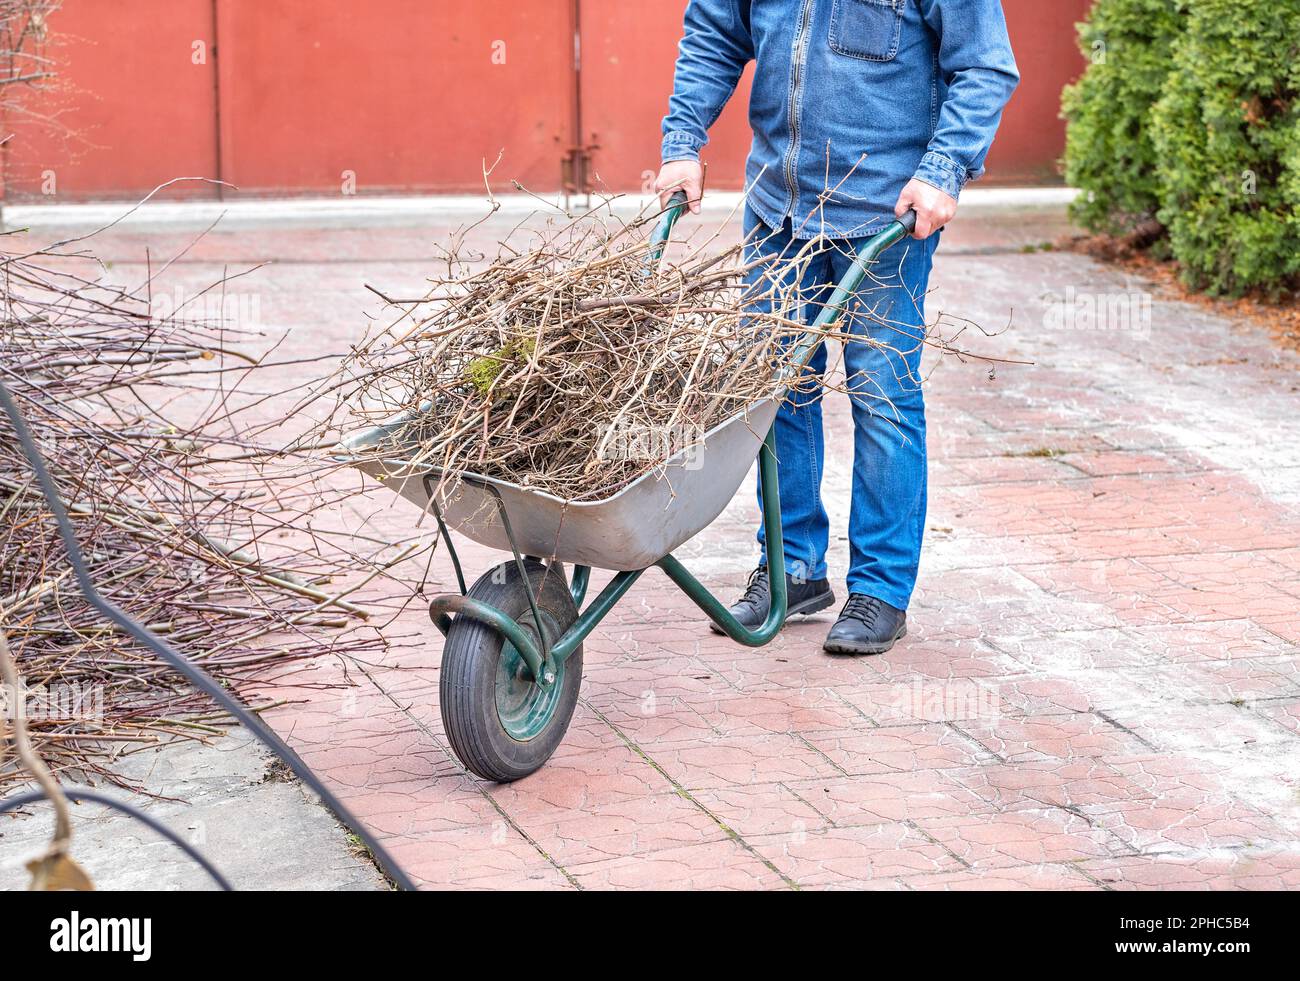 A male gardener uses a garden wheelbarrow to transport cut tree branches during spring cleaning. Stock Photo